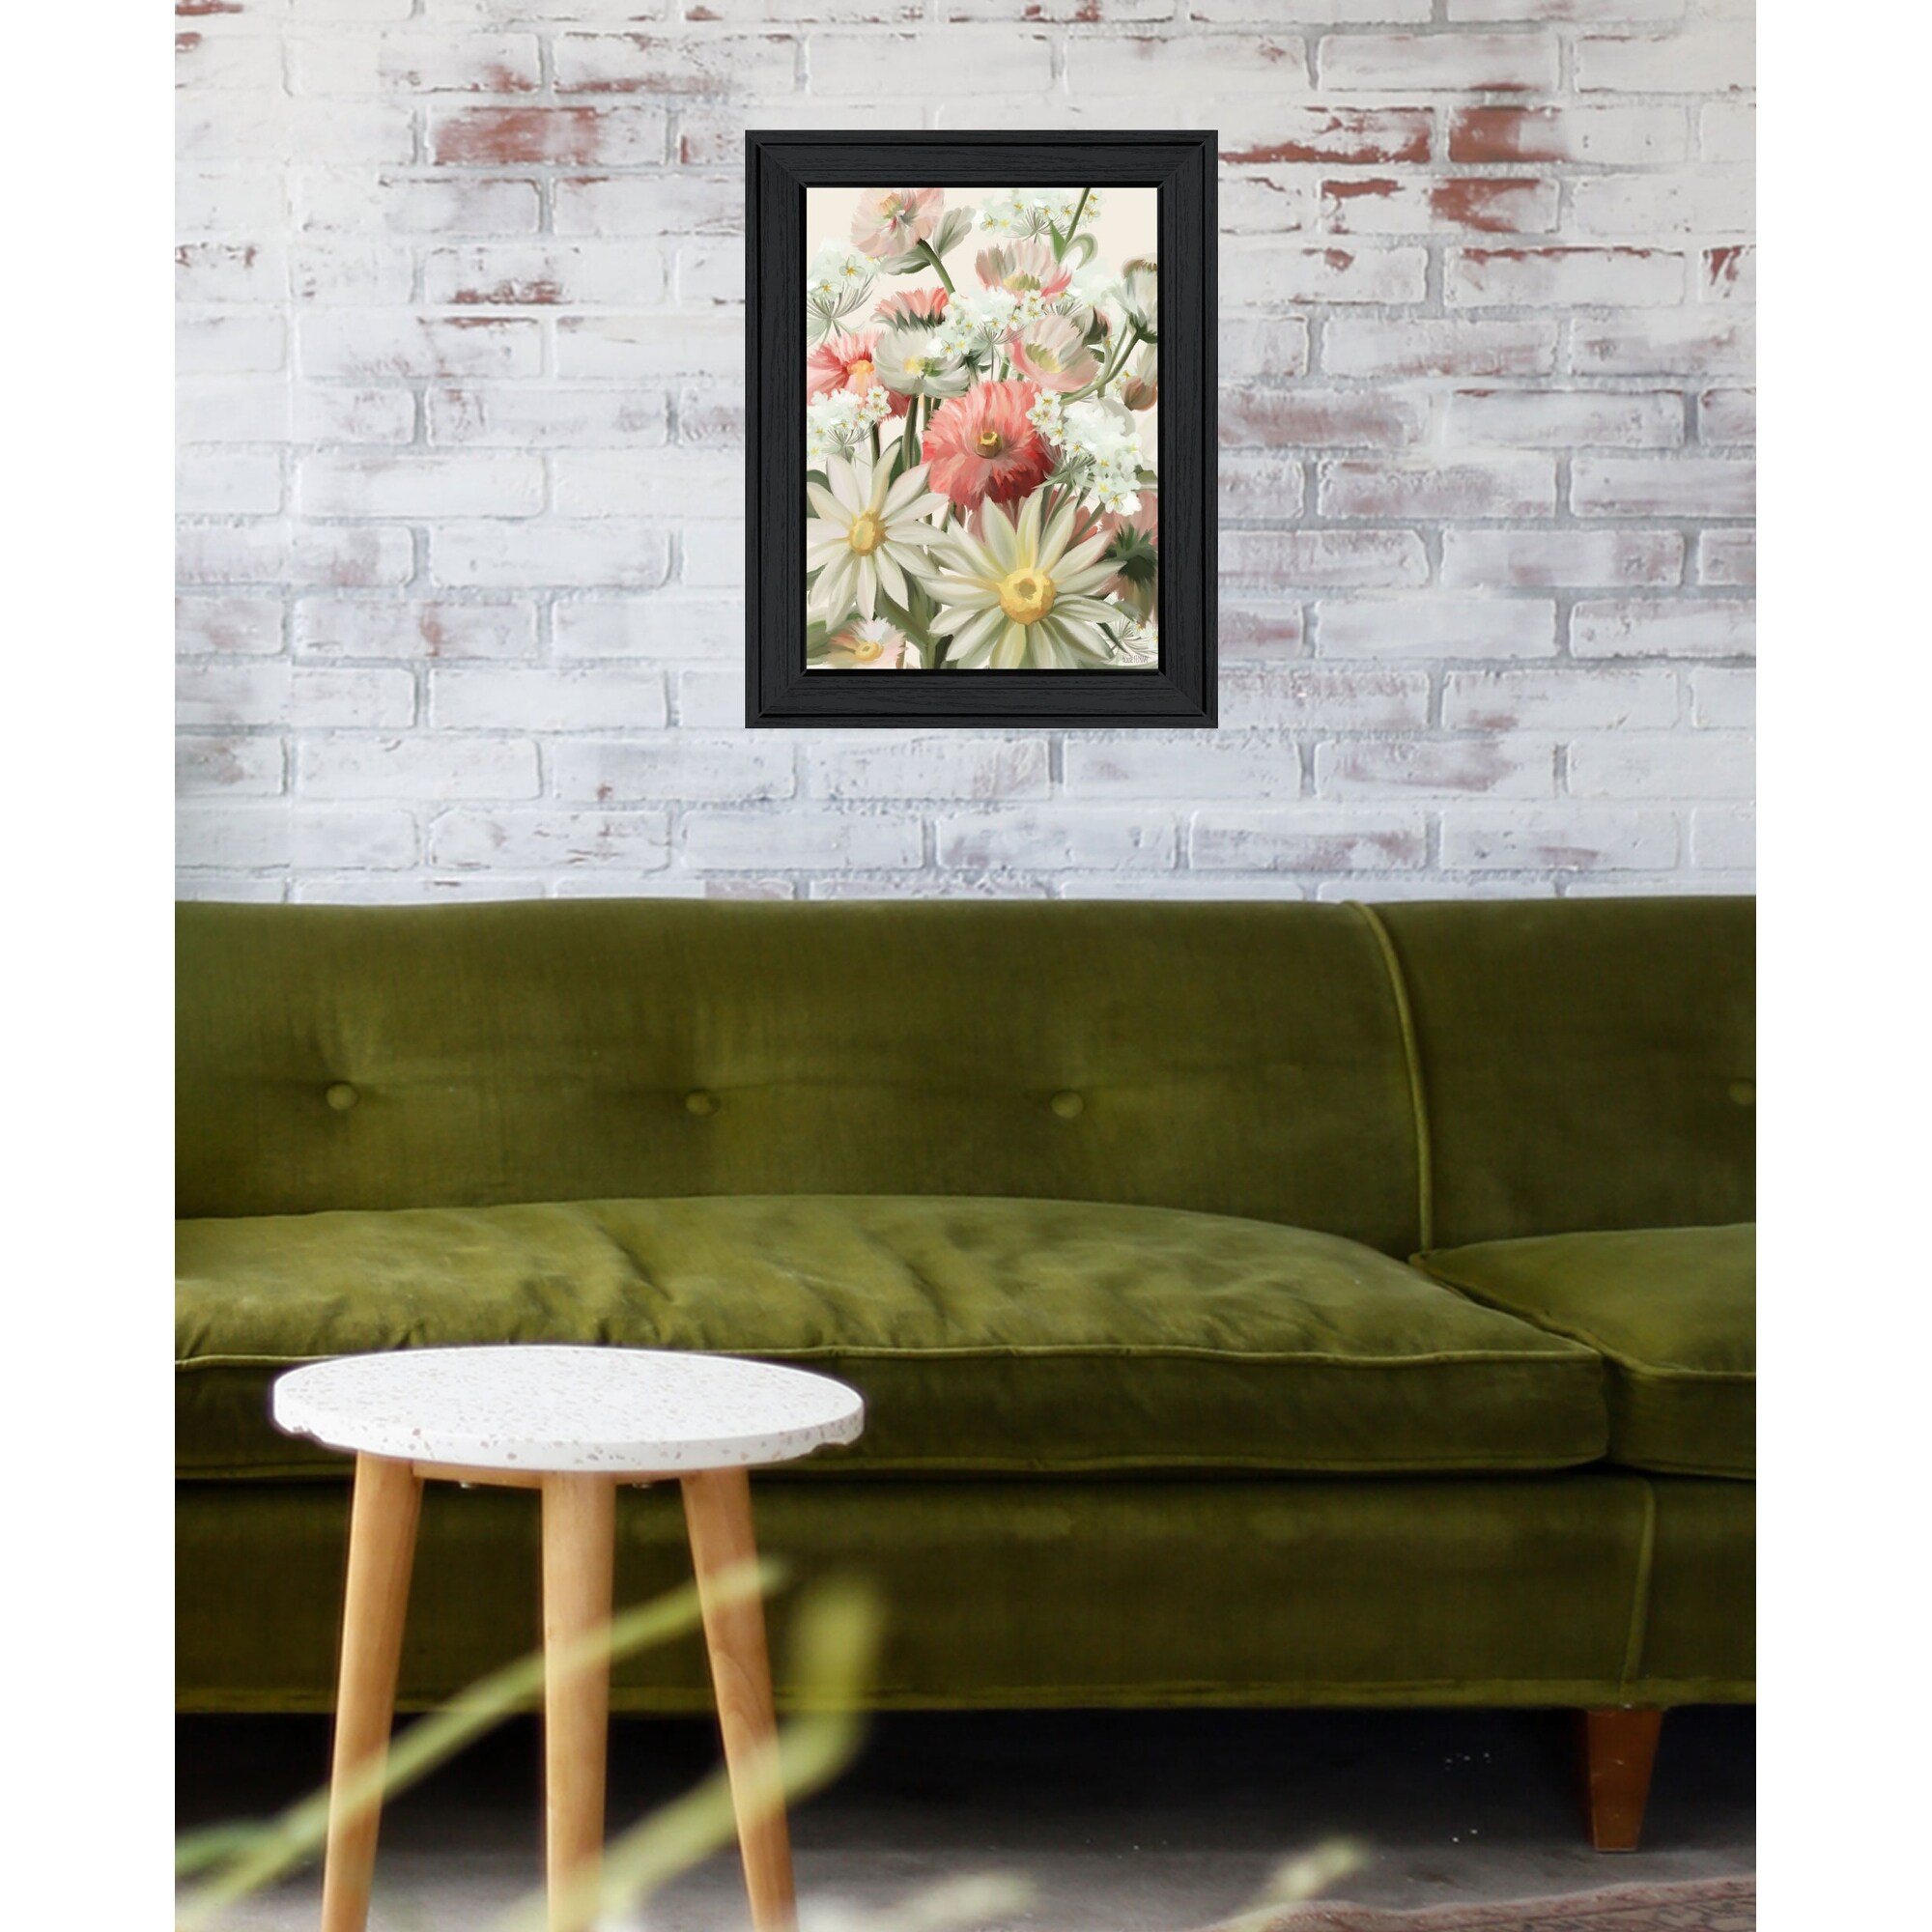 Trendy Decor 4U "Summer Wildflowers For You" Framed Wall Art, Framed Print Wall Decoration by House Fenway